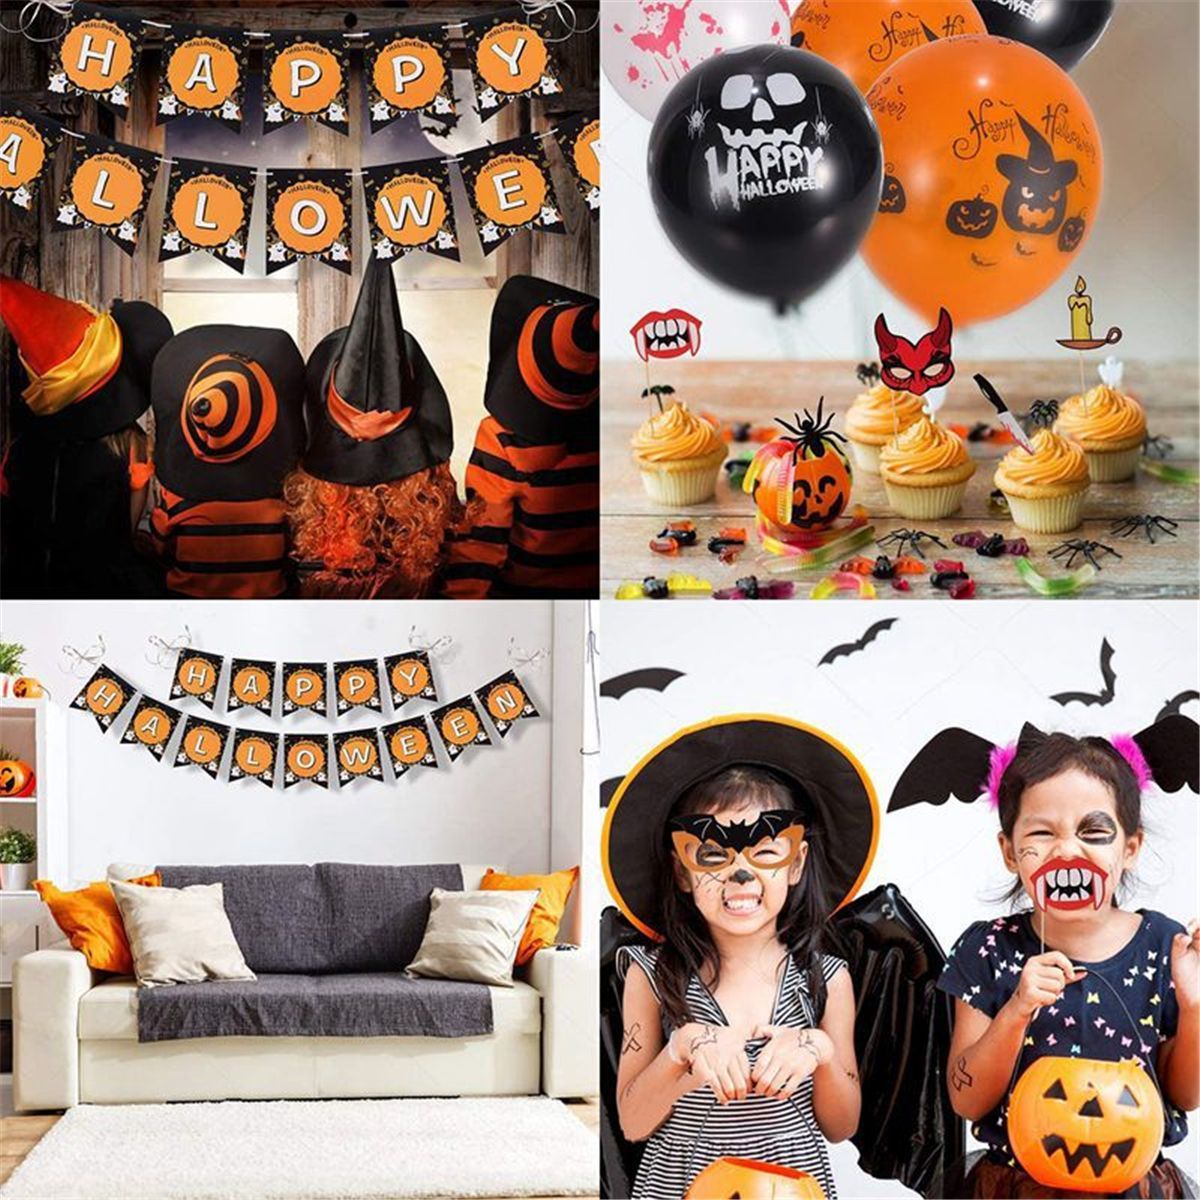 53Pcs-Halloween-Party-Decoration-Balloons-Banners-Photo-Booth-Props-Scary-Selfie-Card-Party-Decorati-1725312